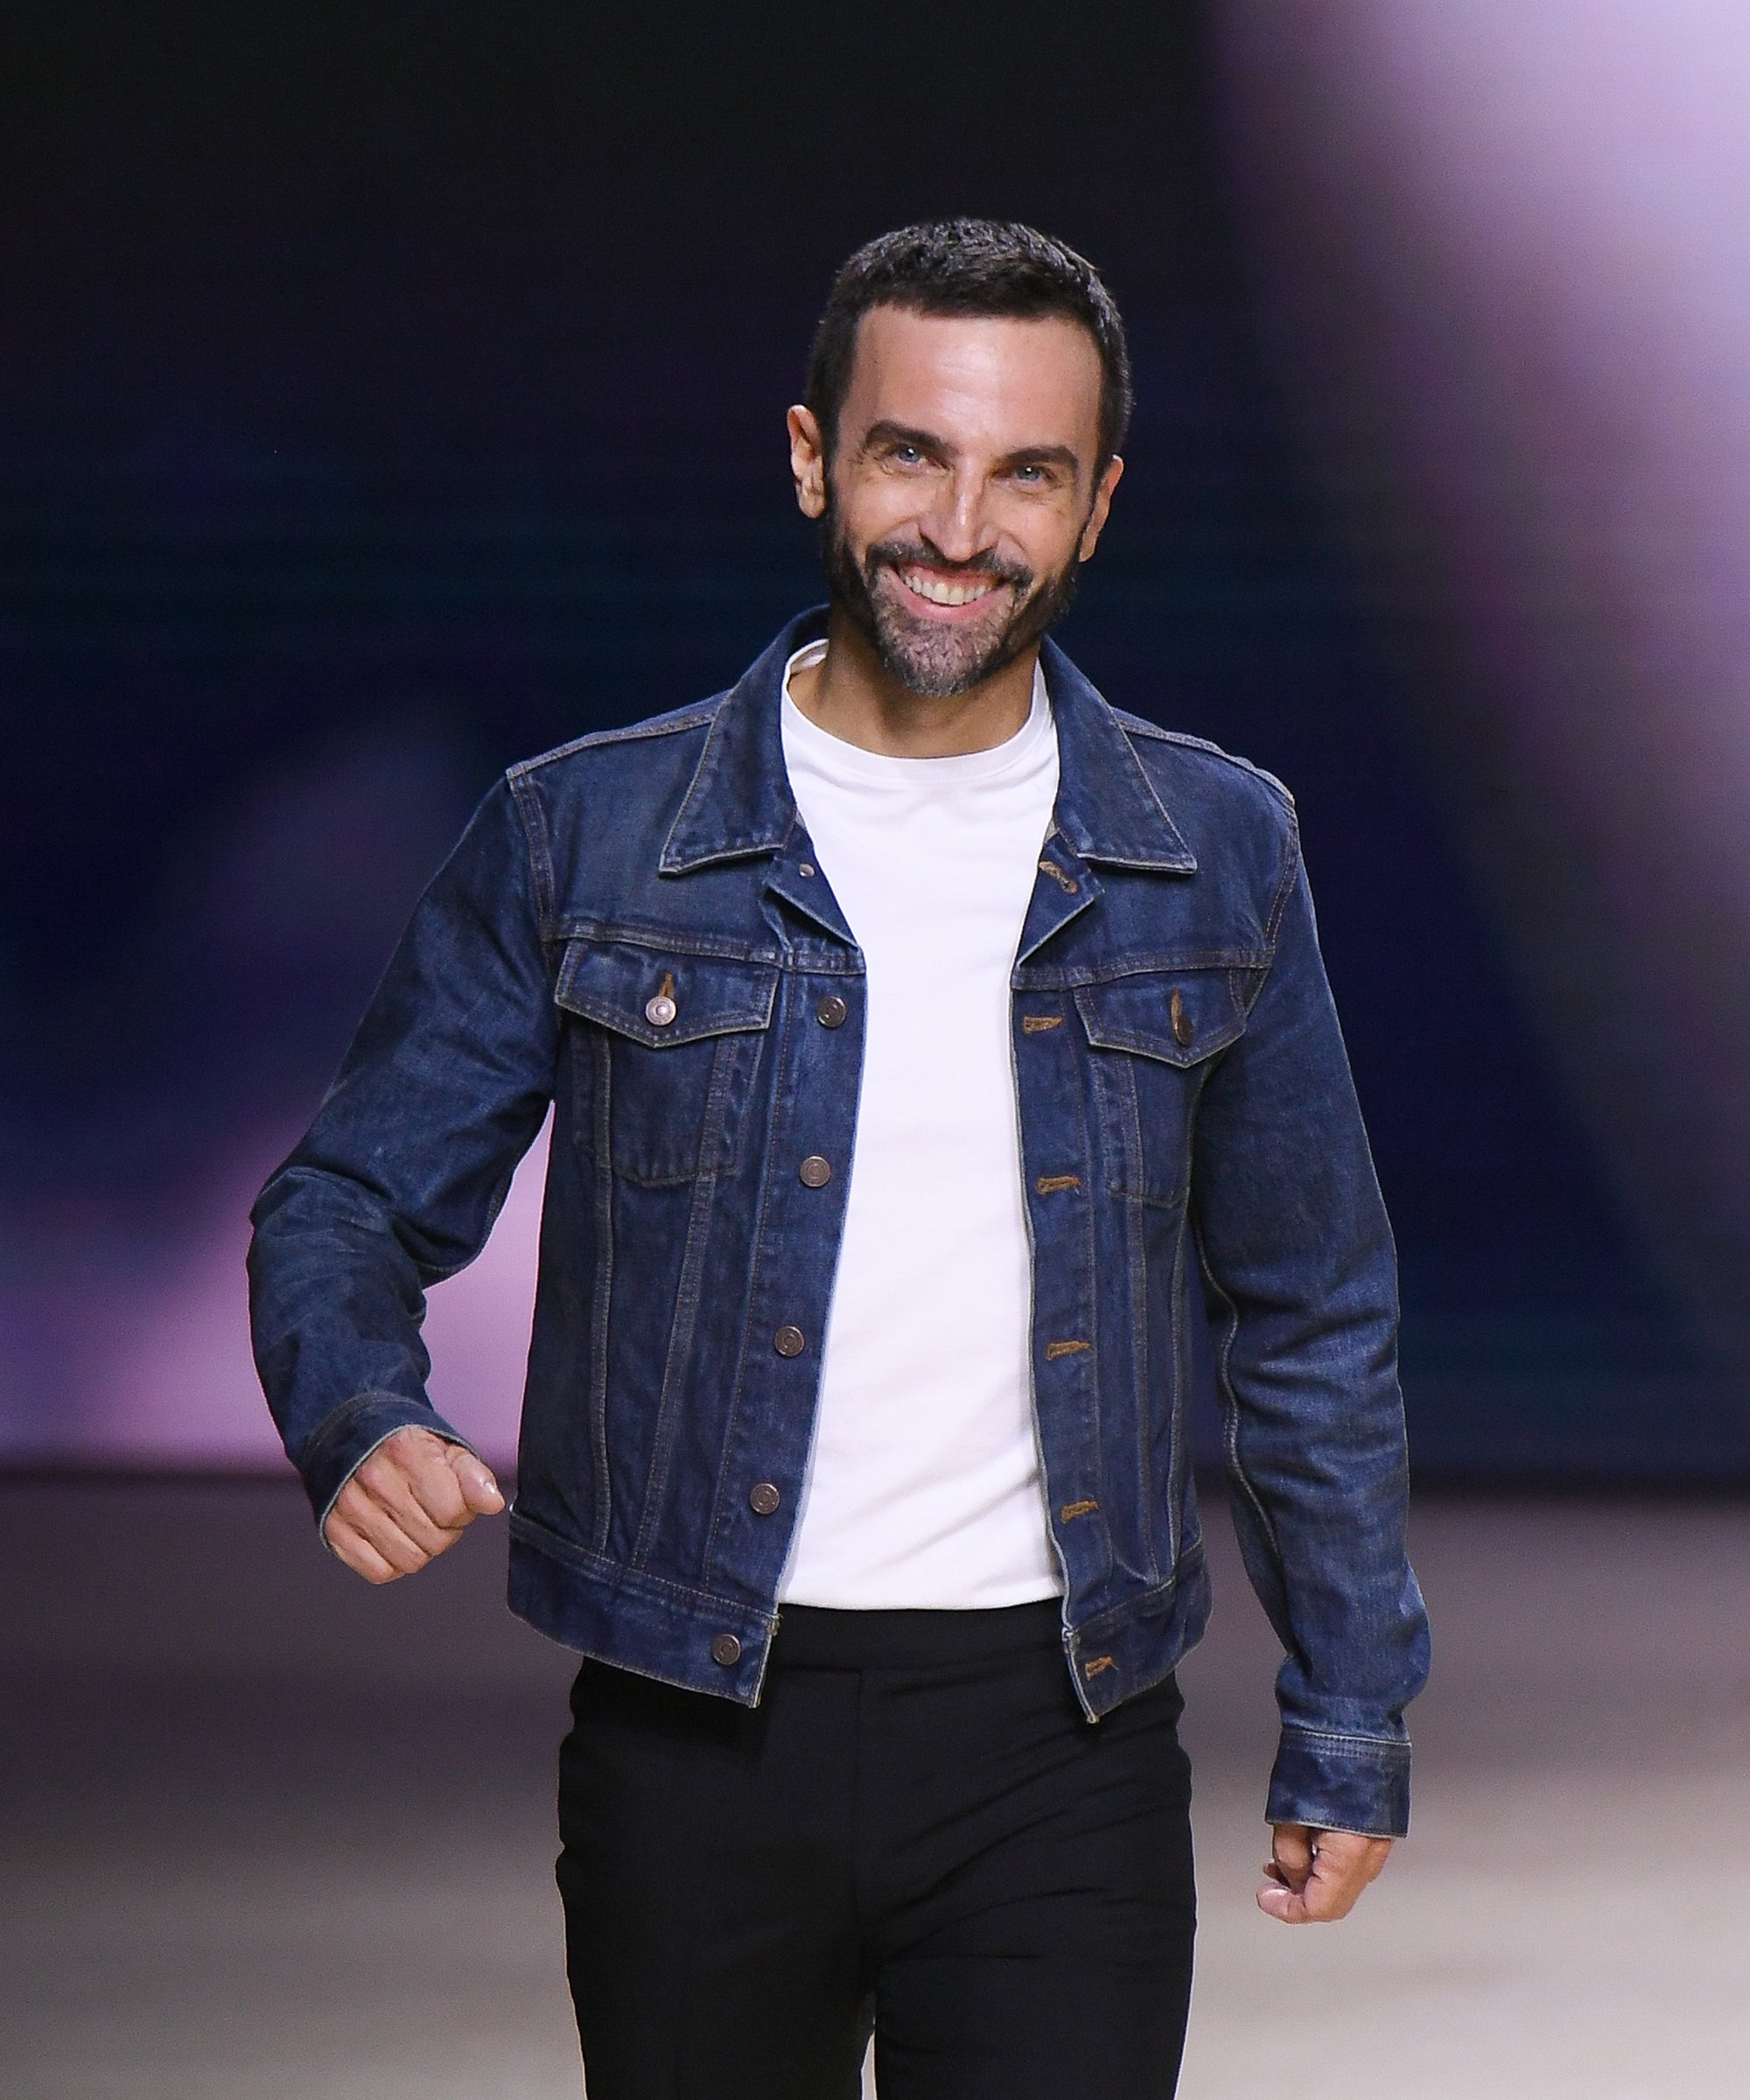 Nicolas Ghesquiére Makes It Clear He Is Anti-Trump